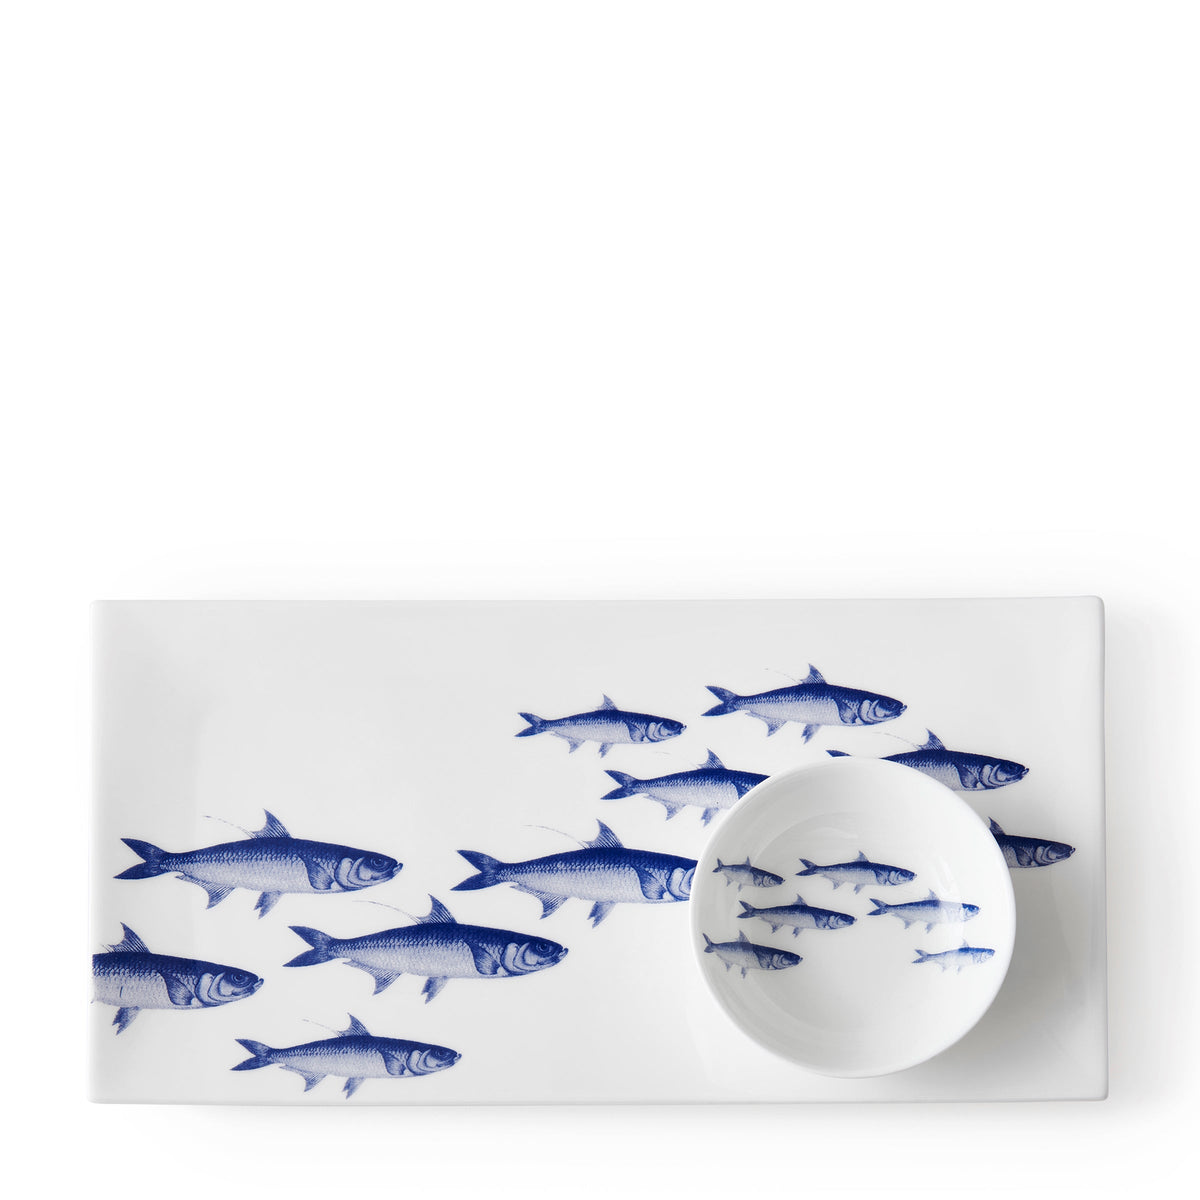 A School of Fish Sushi Tray Large by Caskata, perfect for serving appetizers.